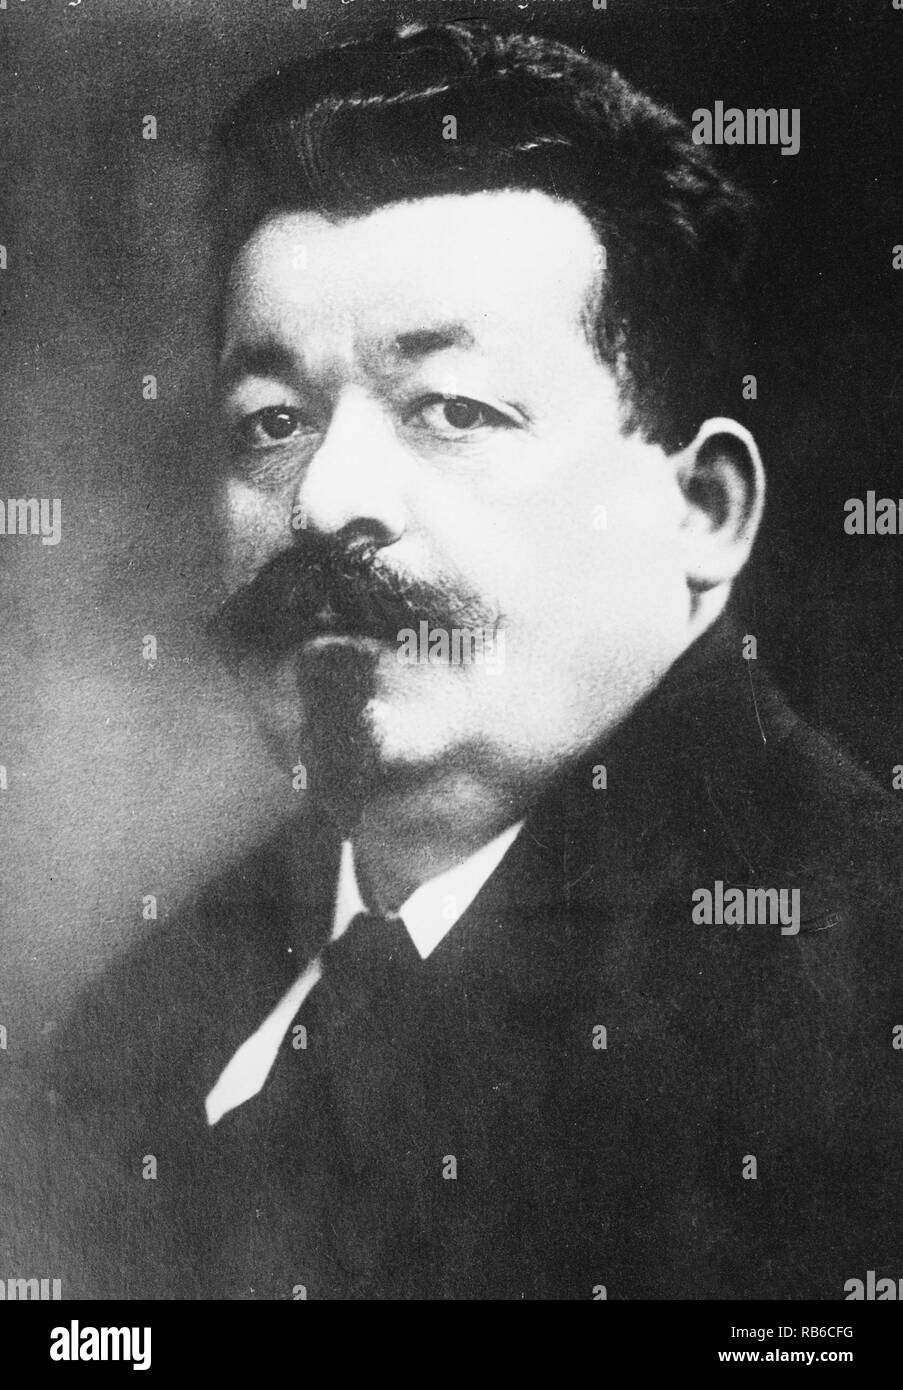 Friedrich Ebert (1871 – 1925) German politician of the Social Democratic Party of Germany (SPD) and the first President of Germany from 1919 until 1925. Stock Photo